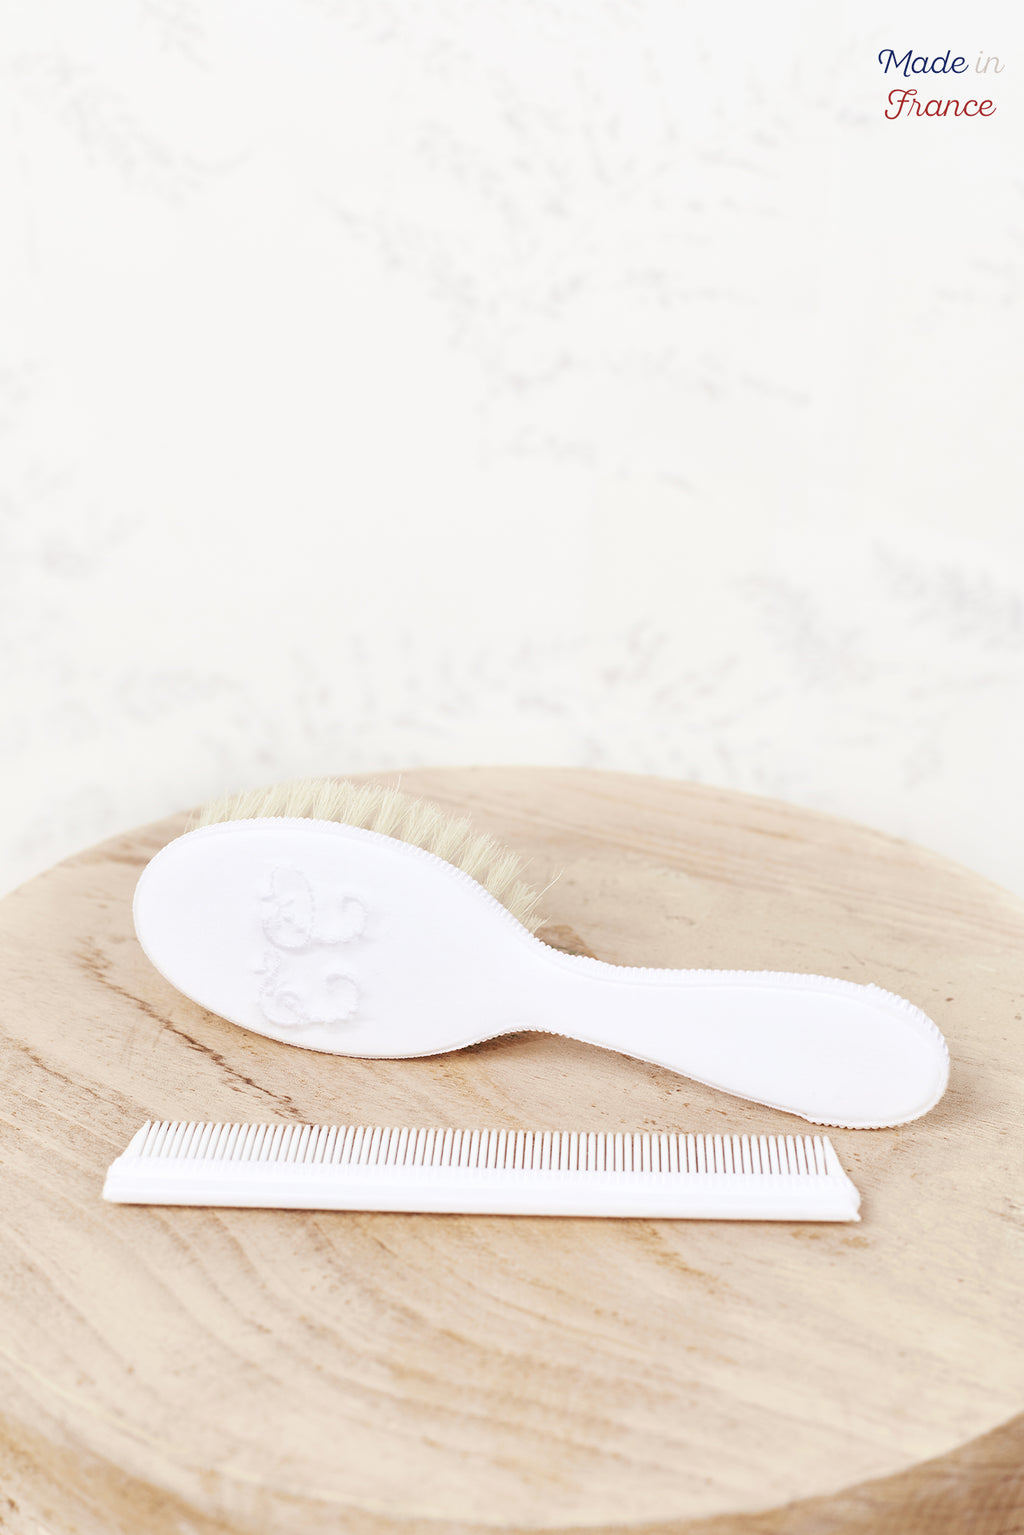 Brosse & Peigne - Monogramme Made In France